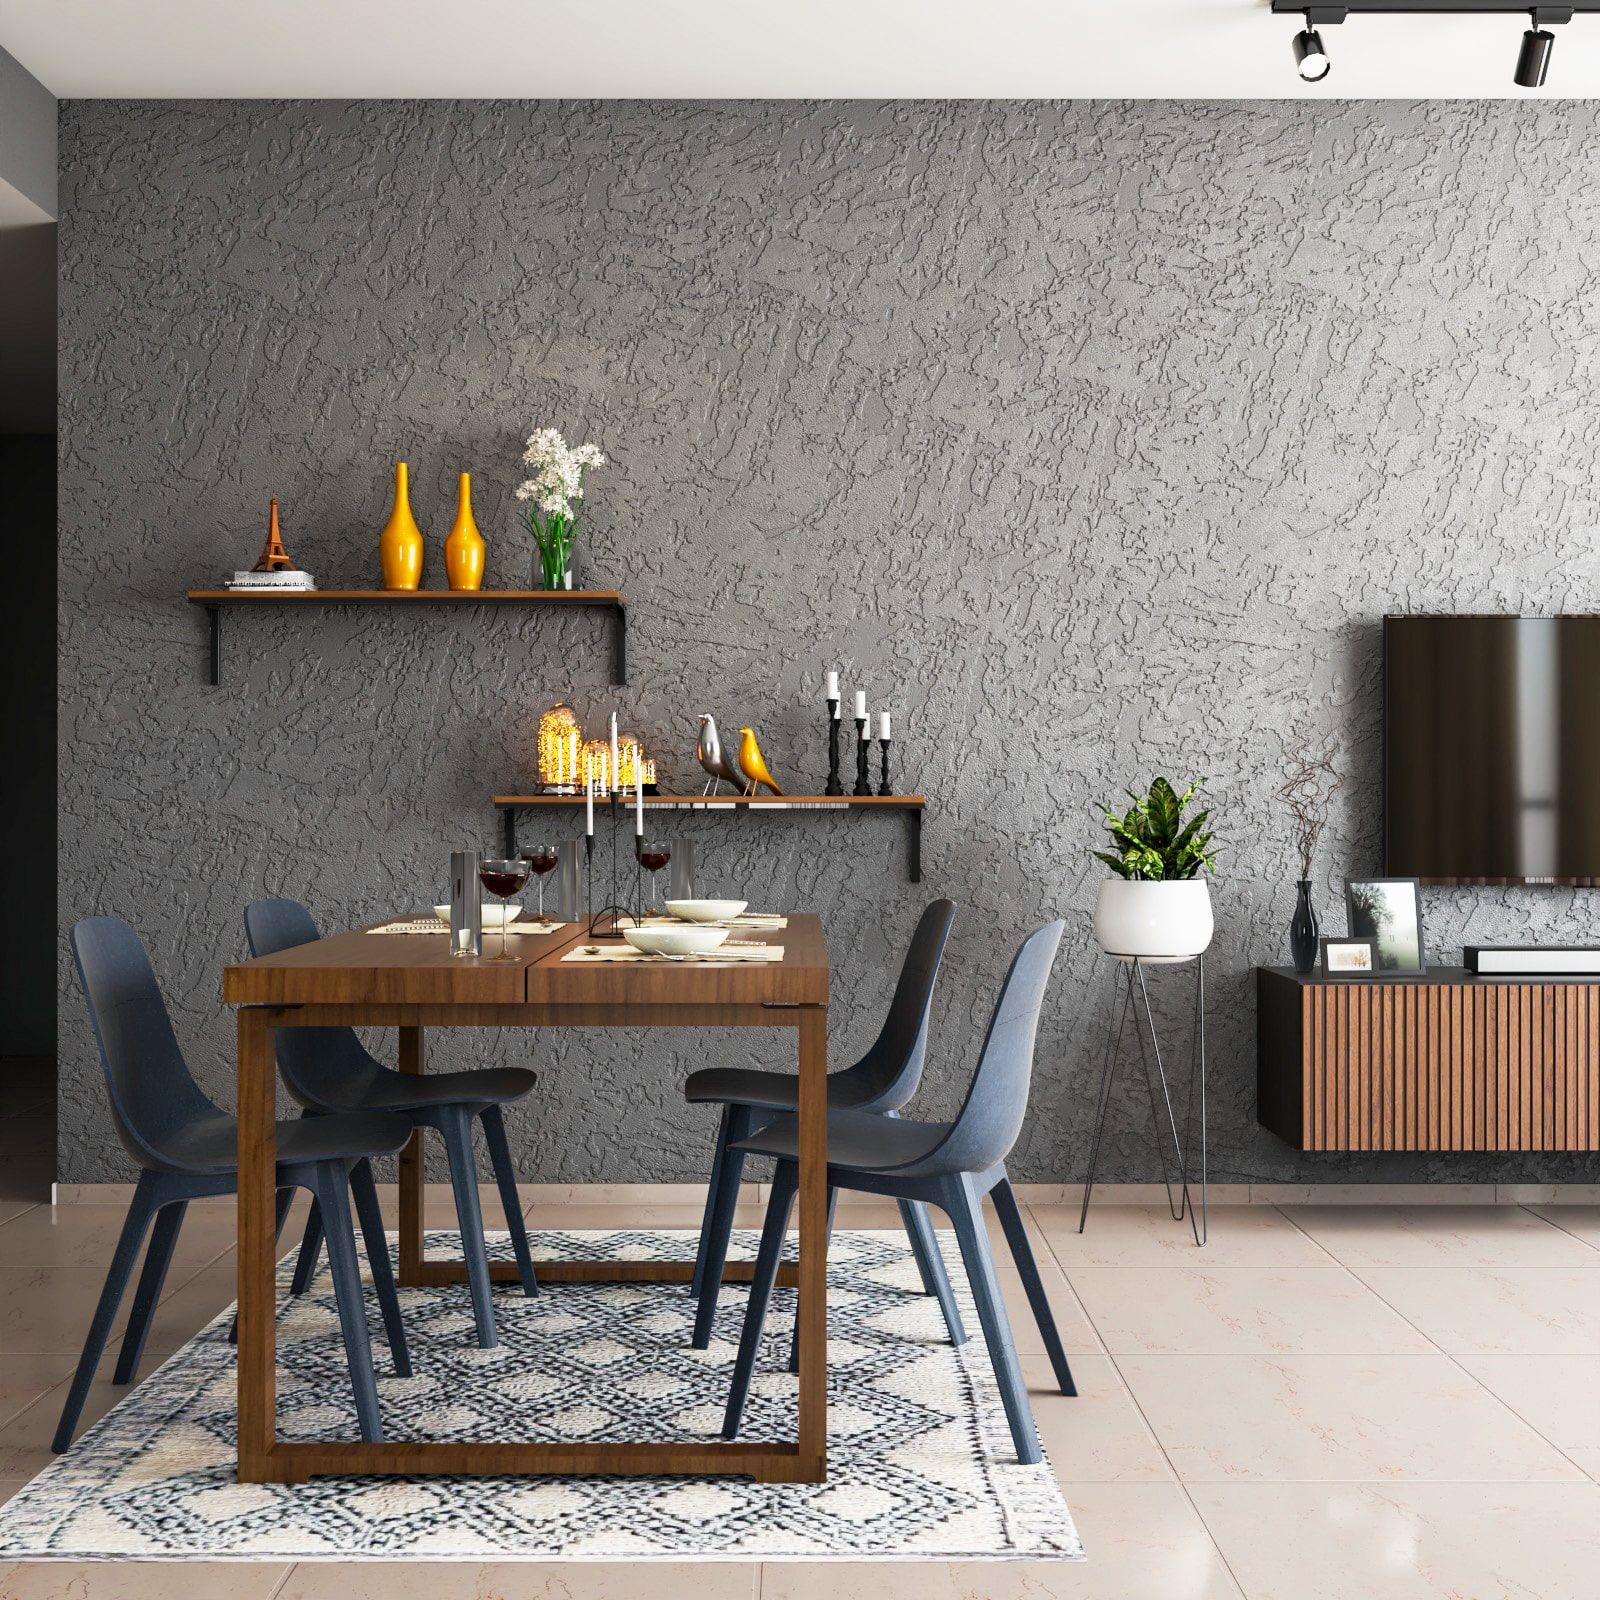 Modern Dining Room Design With A 4-Seater Wooden Table